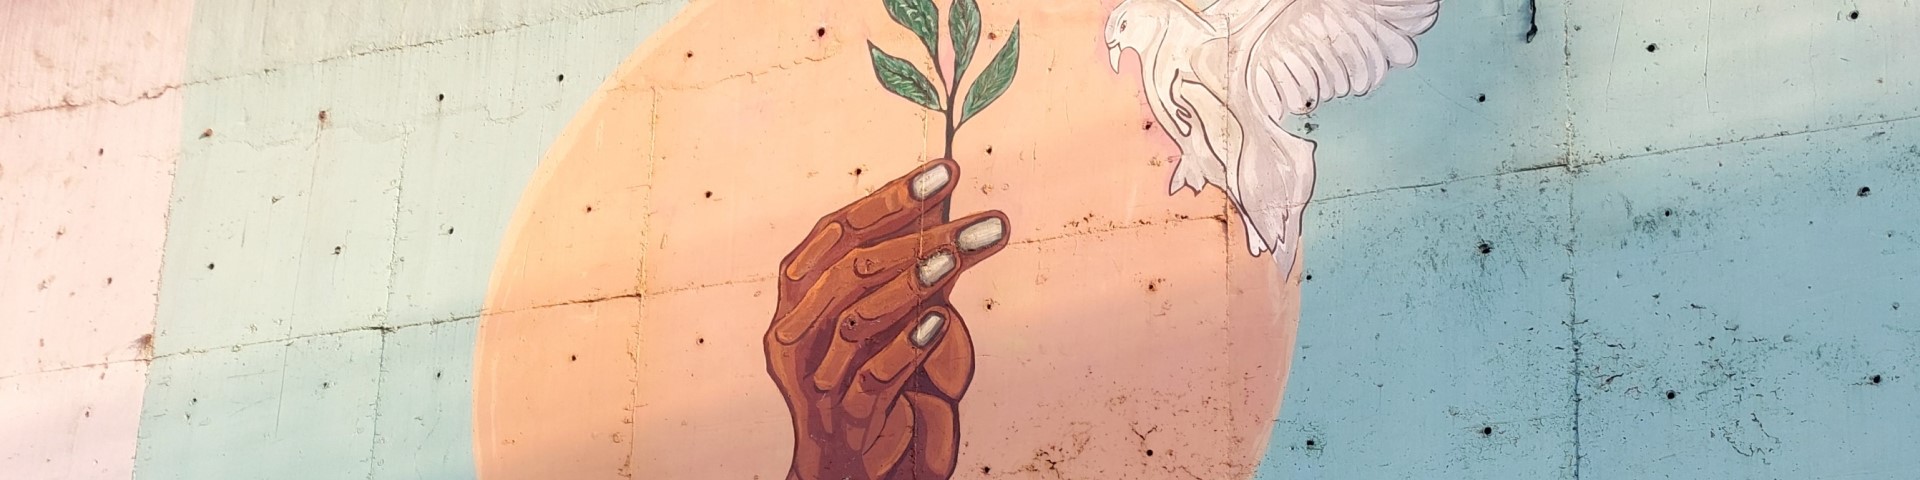 A painting on a wall shows a peace dove and a hand holding an olive branch.